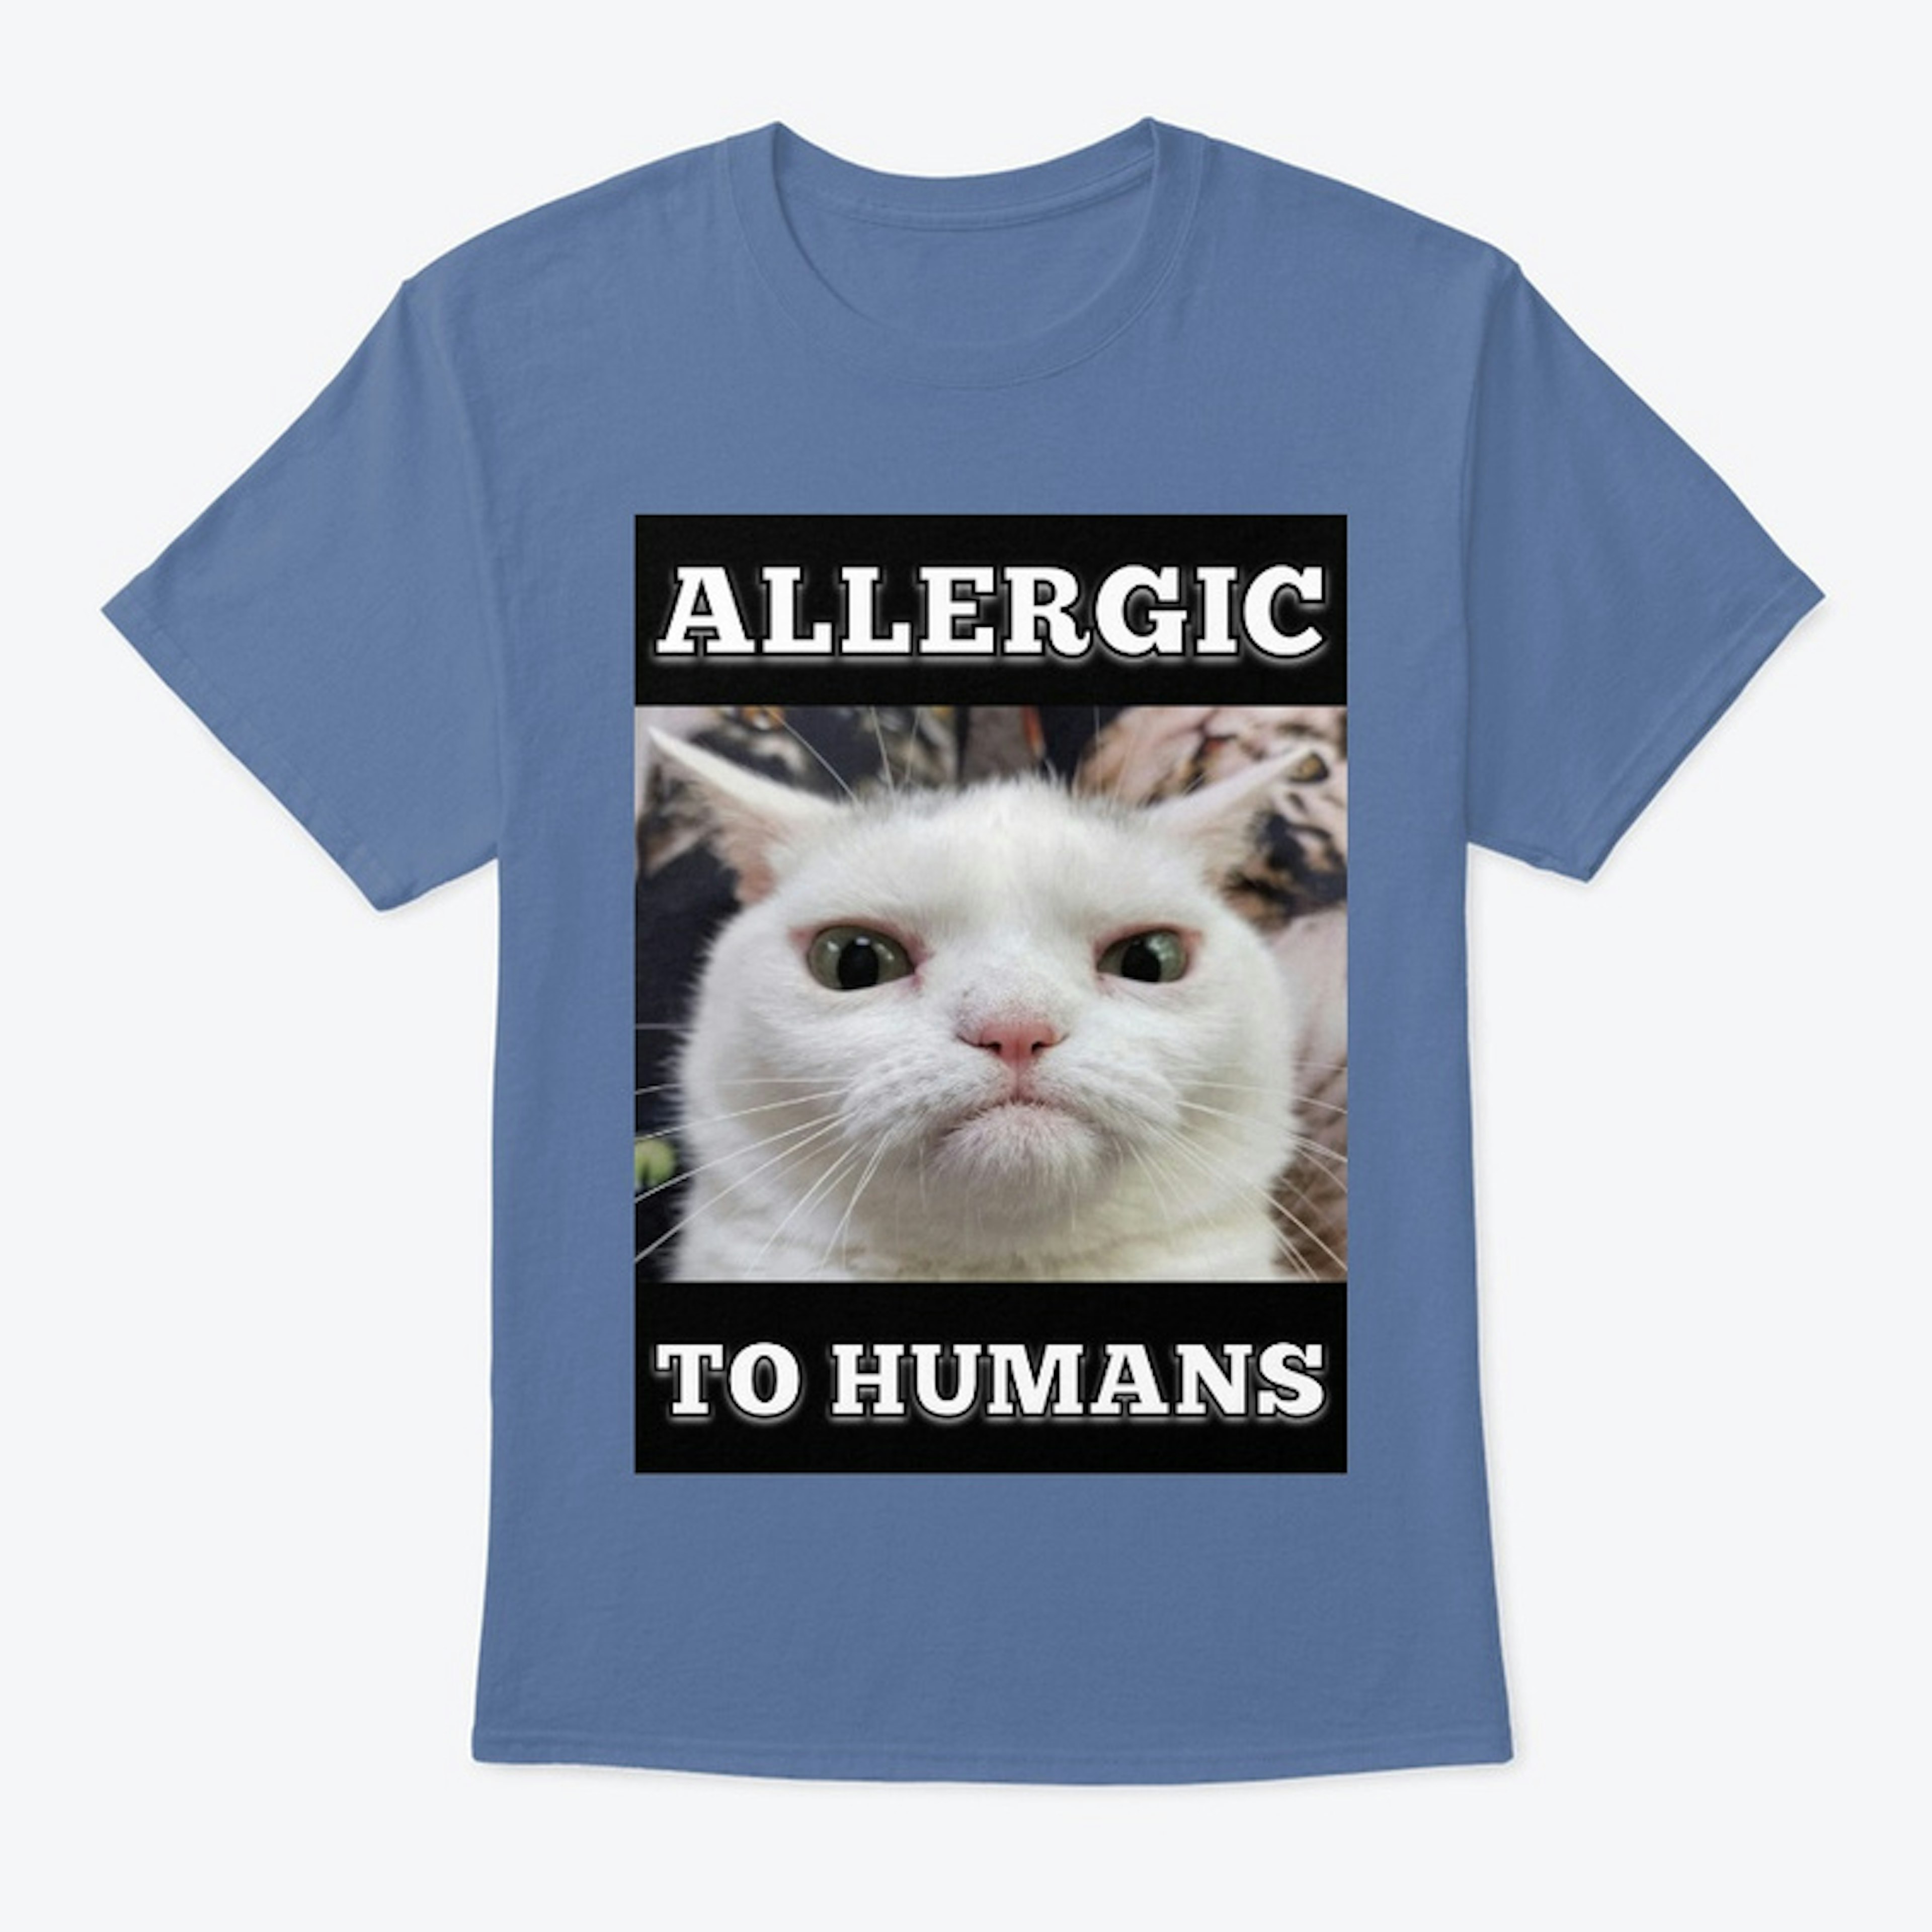 Allergic to Humans Shirt